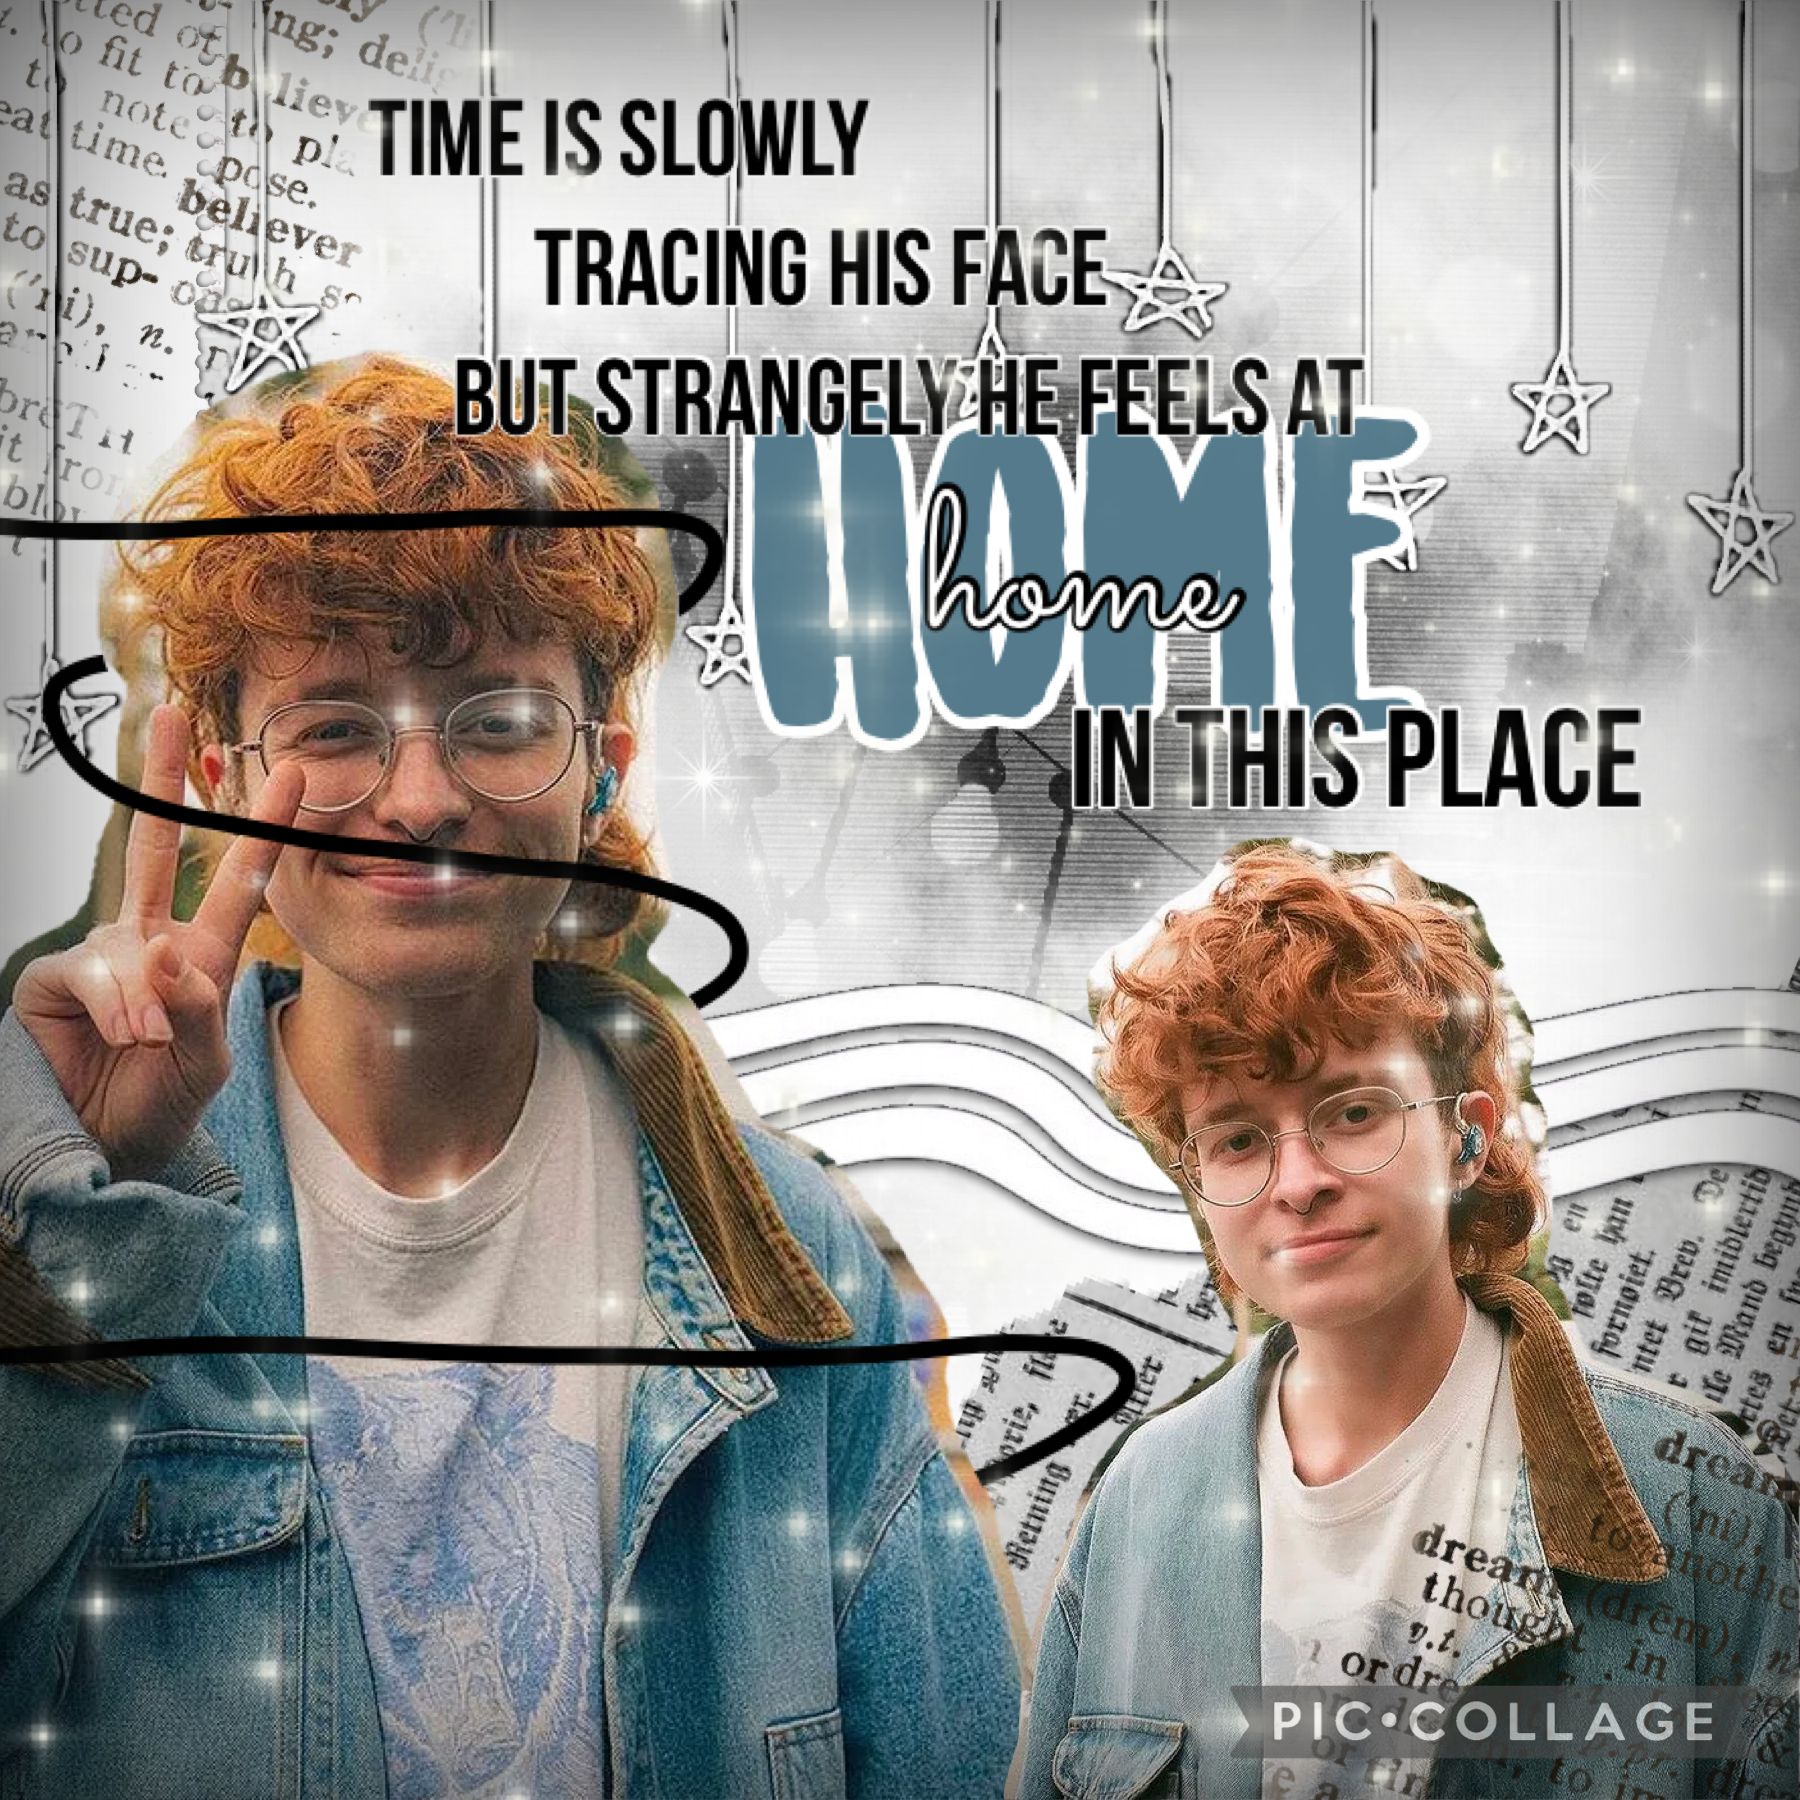 🖤 TAP 🖤
🖤 Cavetown collage!! 🖤
🖤 lyrics from the song ‘Home’ by Cavetown! 🖤
🖤 OMG I LOVE THIS SONG!! 🖤
🖤 qotd- favourite book? 🖤
🖤 aotd-  Heartstopper Series!! 🖤
🖤 ILYSM 🖤